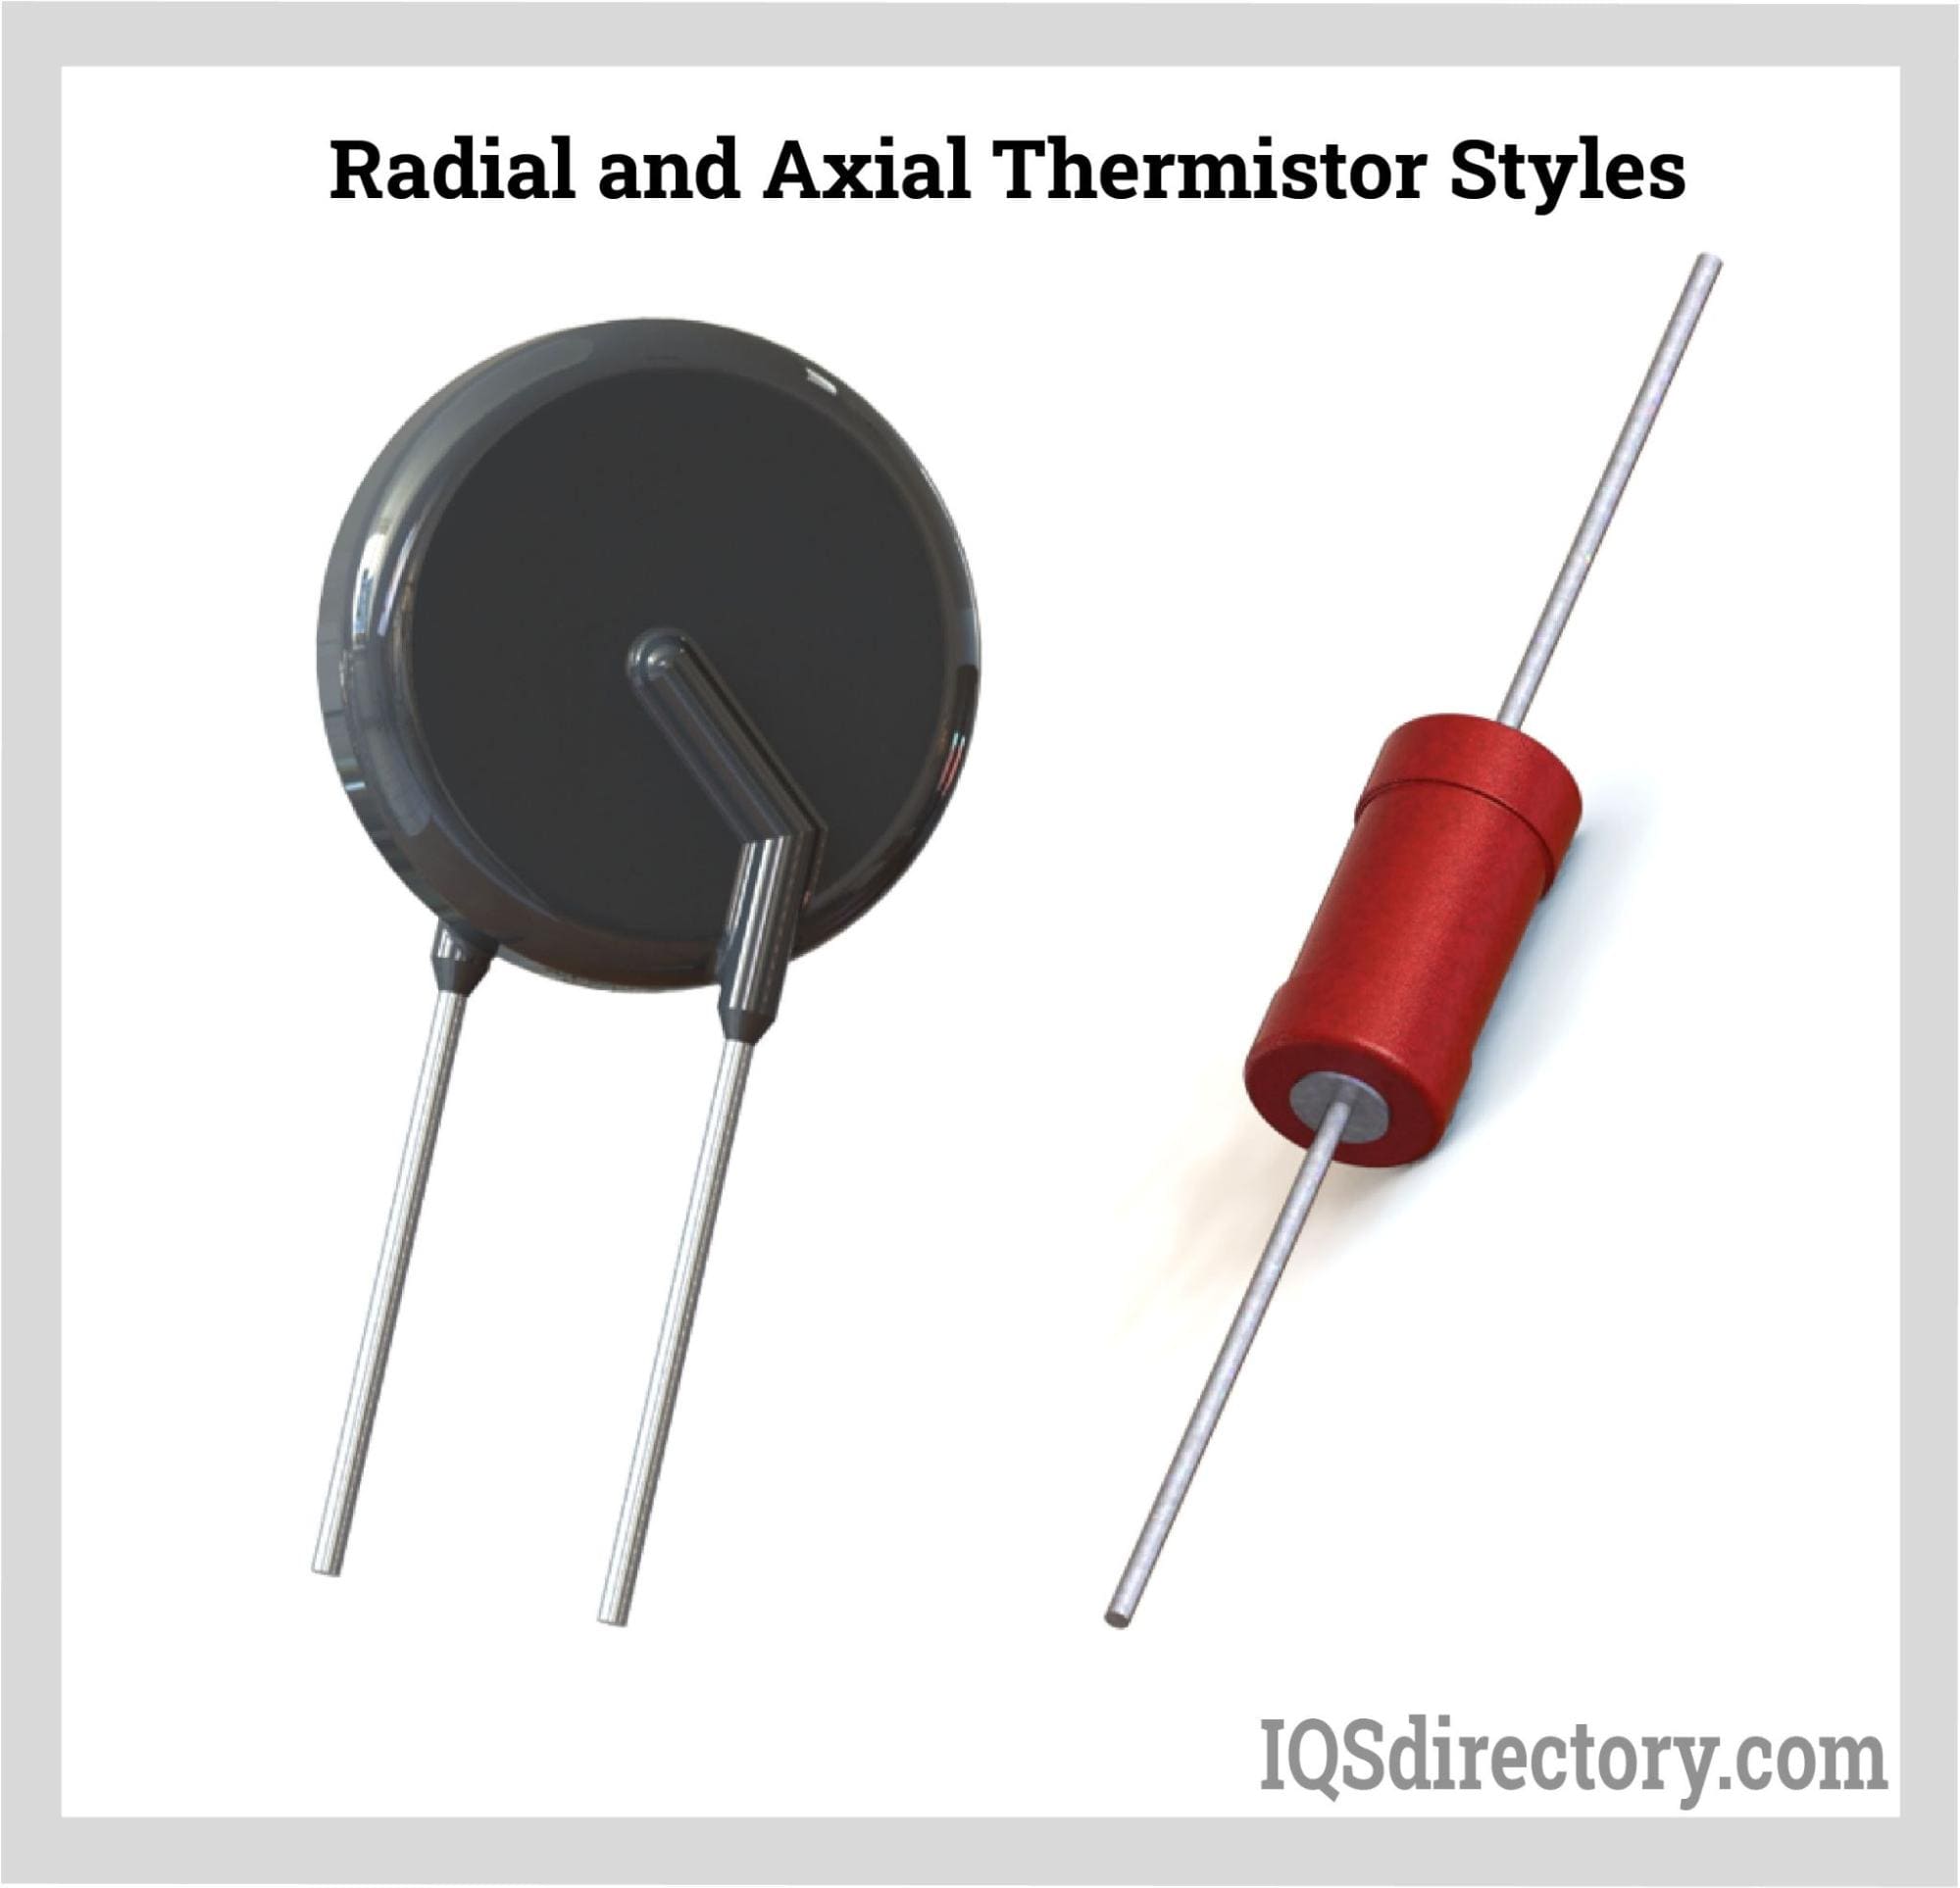 Radial and Axial Thermistor Styles